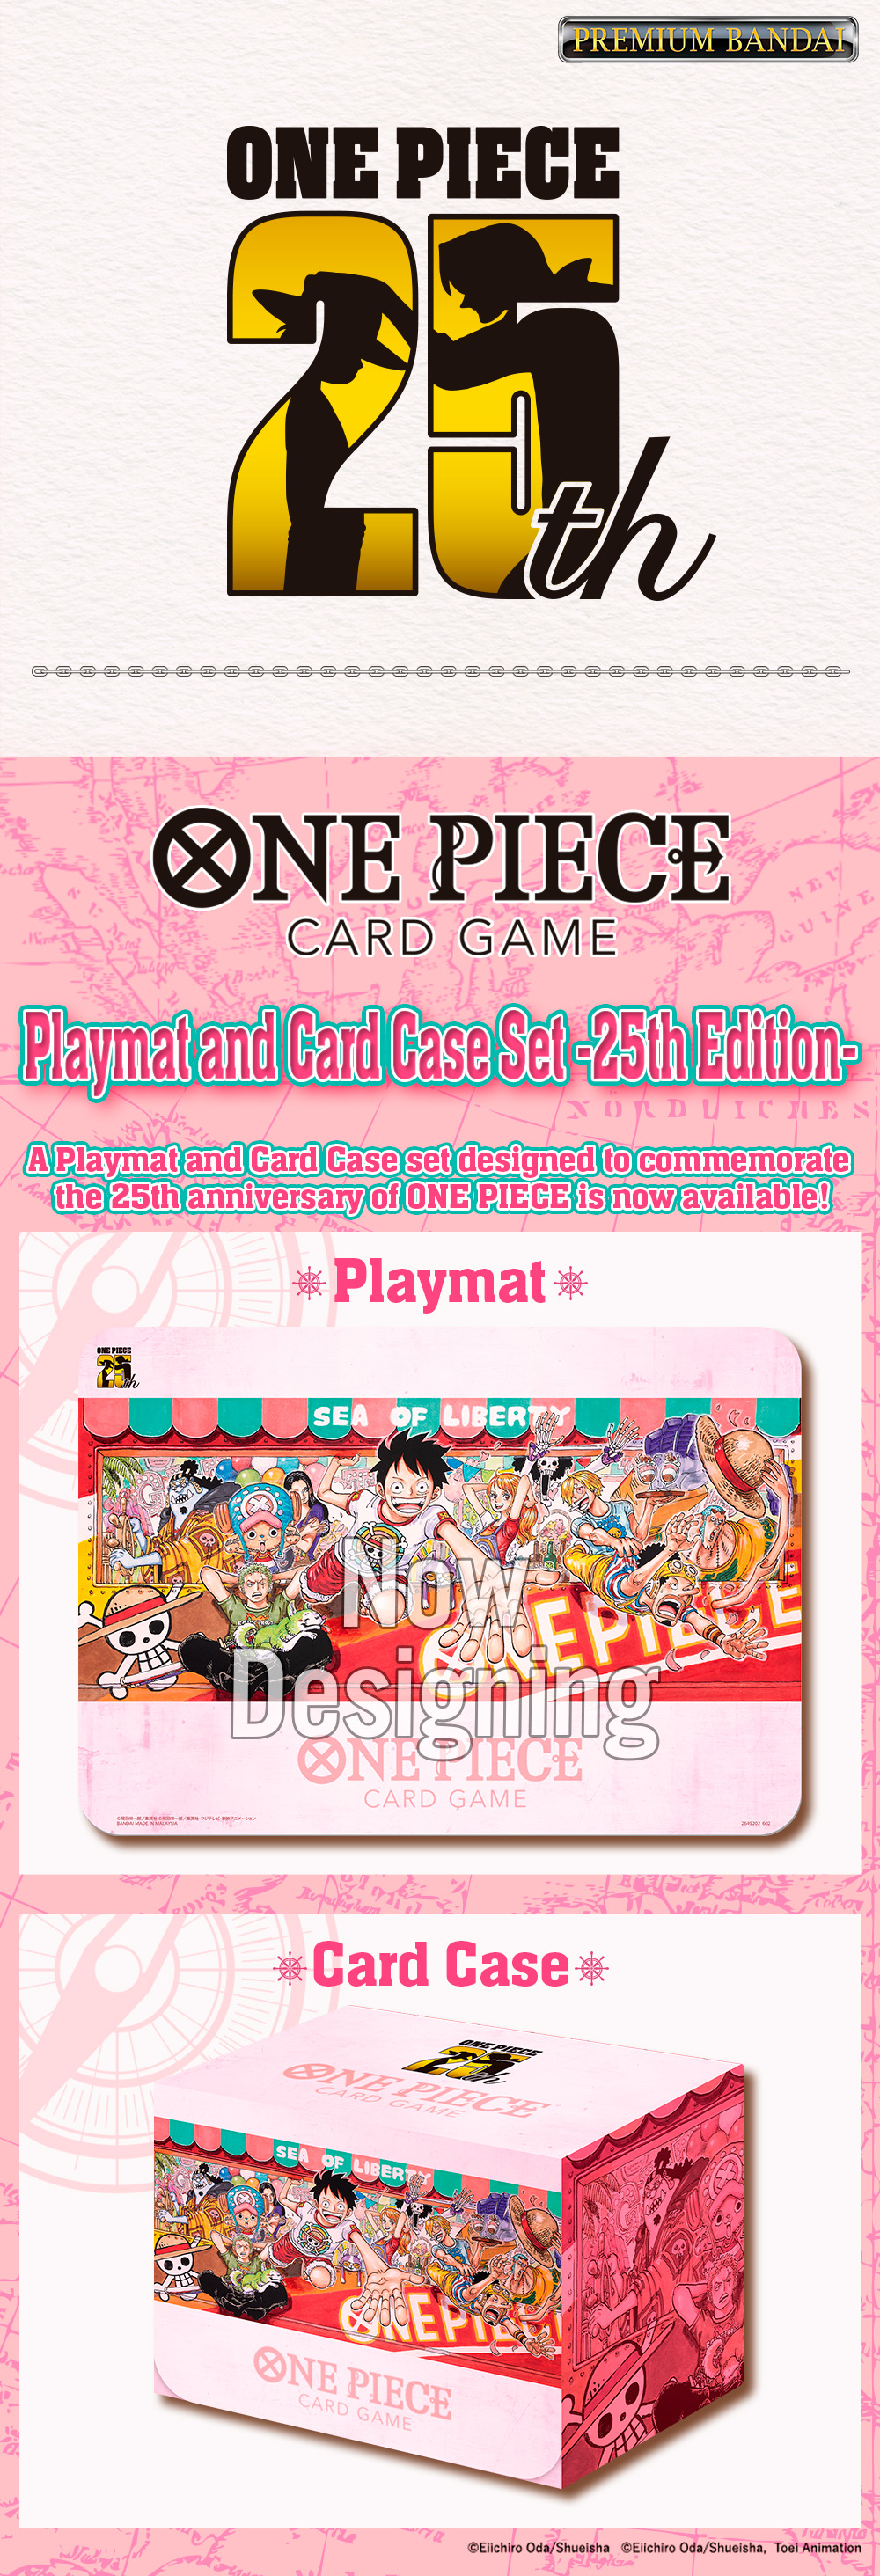 20221104_one_piece_card_game_pre_playmat